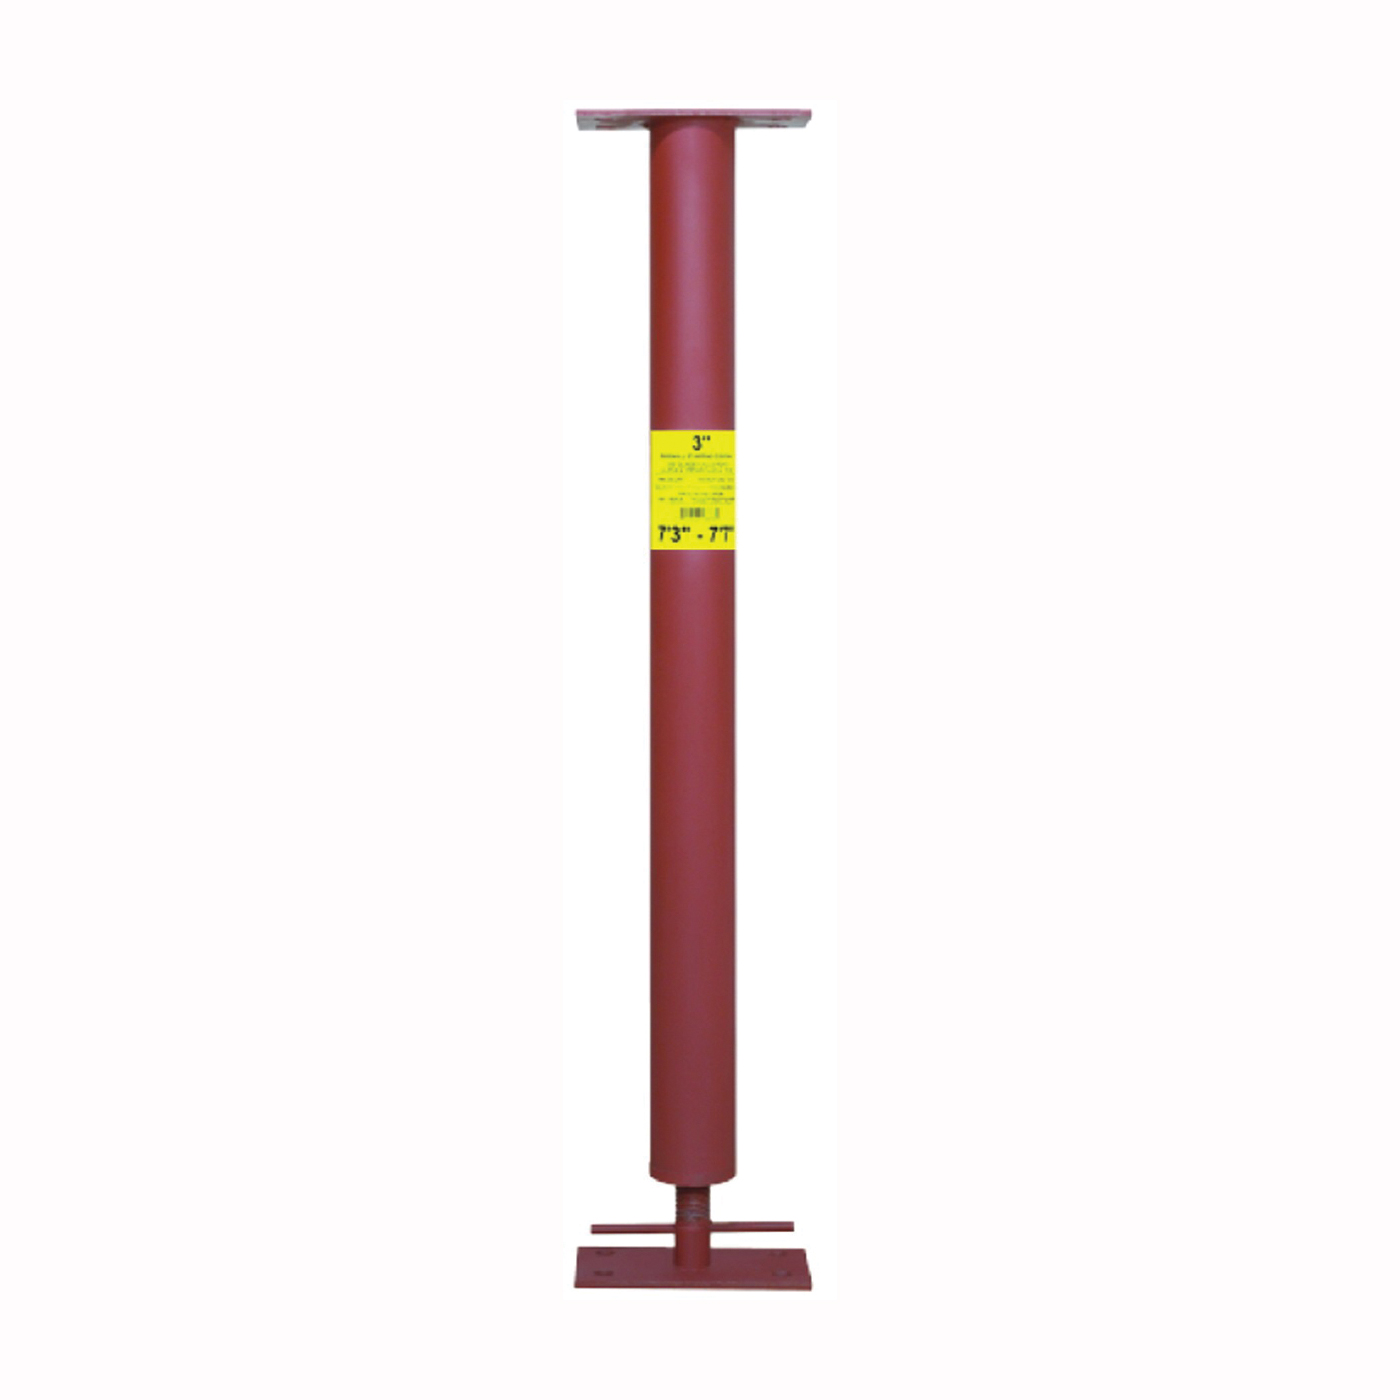 Extend-O-Column Series AC376/3760 Round Column, 7 ft 6 in to 7 ft 10 in